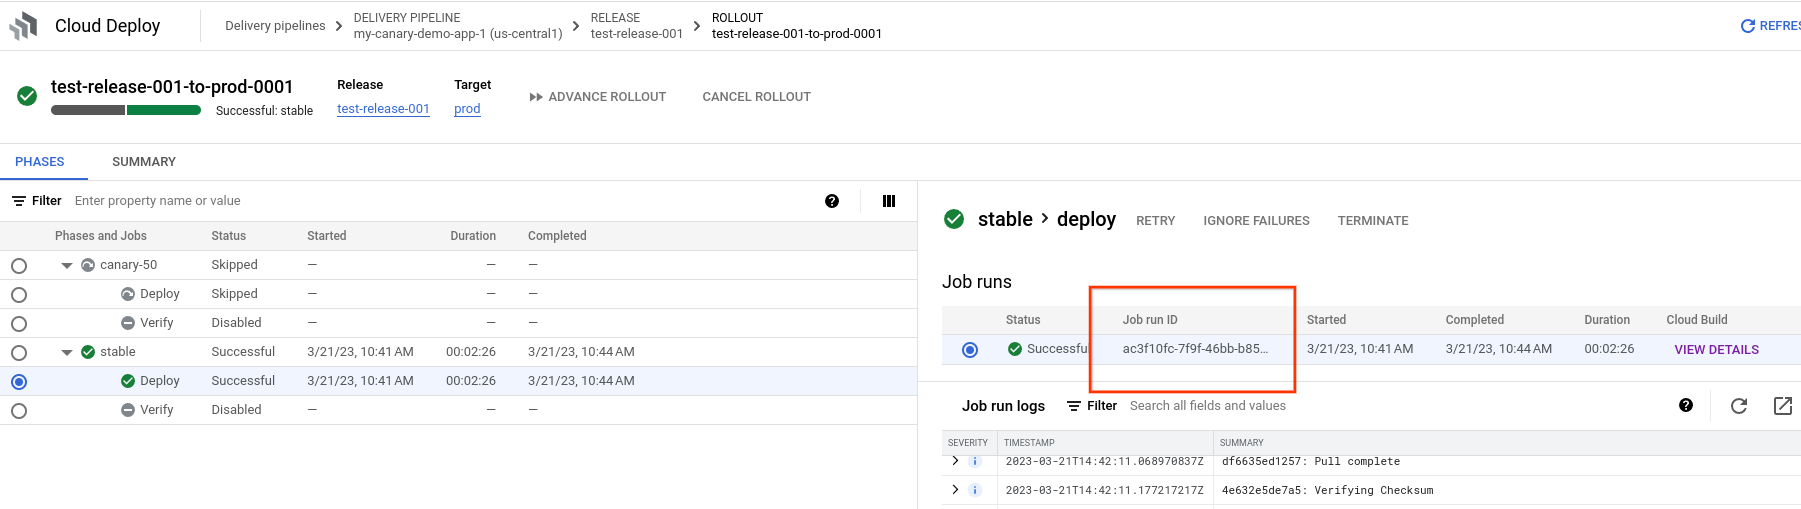 Job run ID in the rollout details in Google Cloud console 